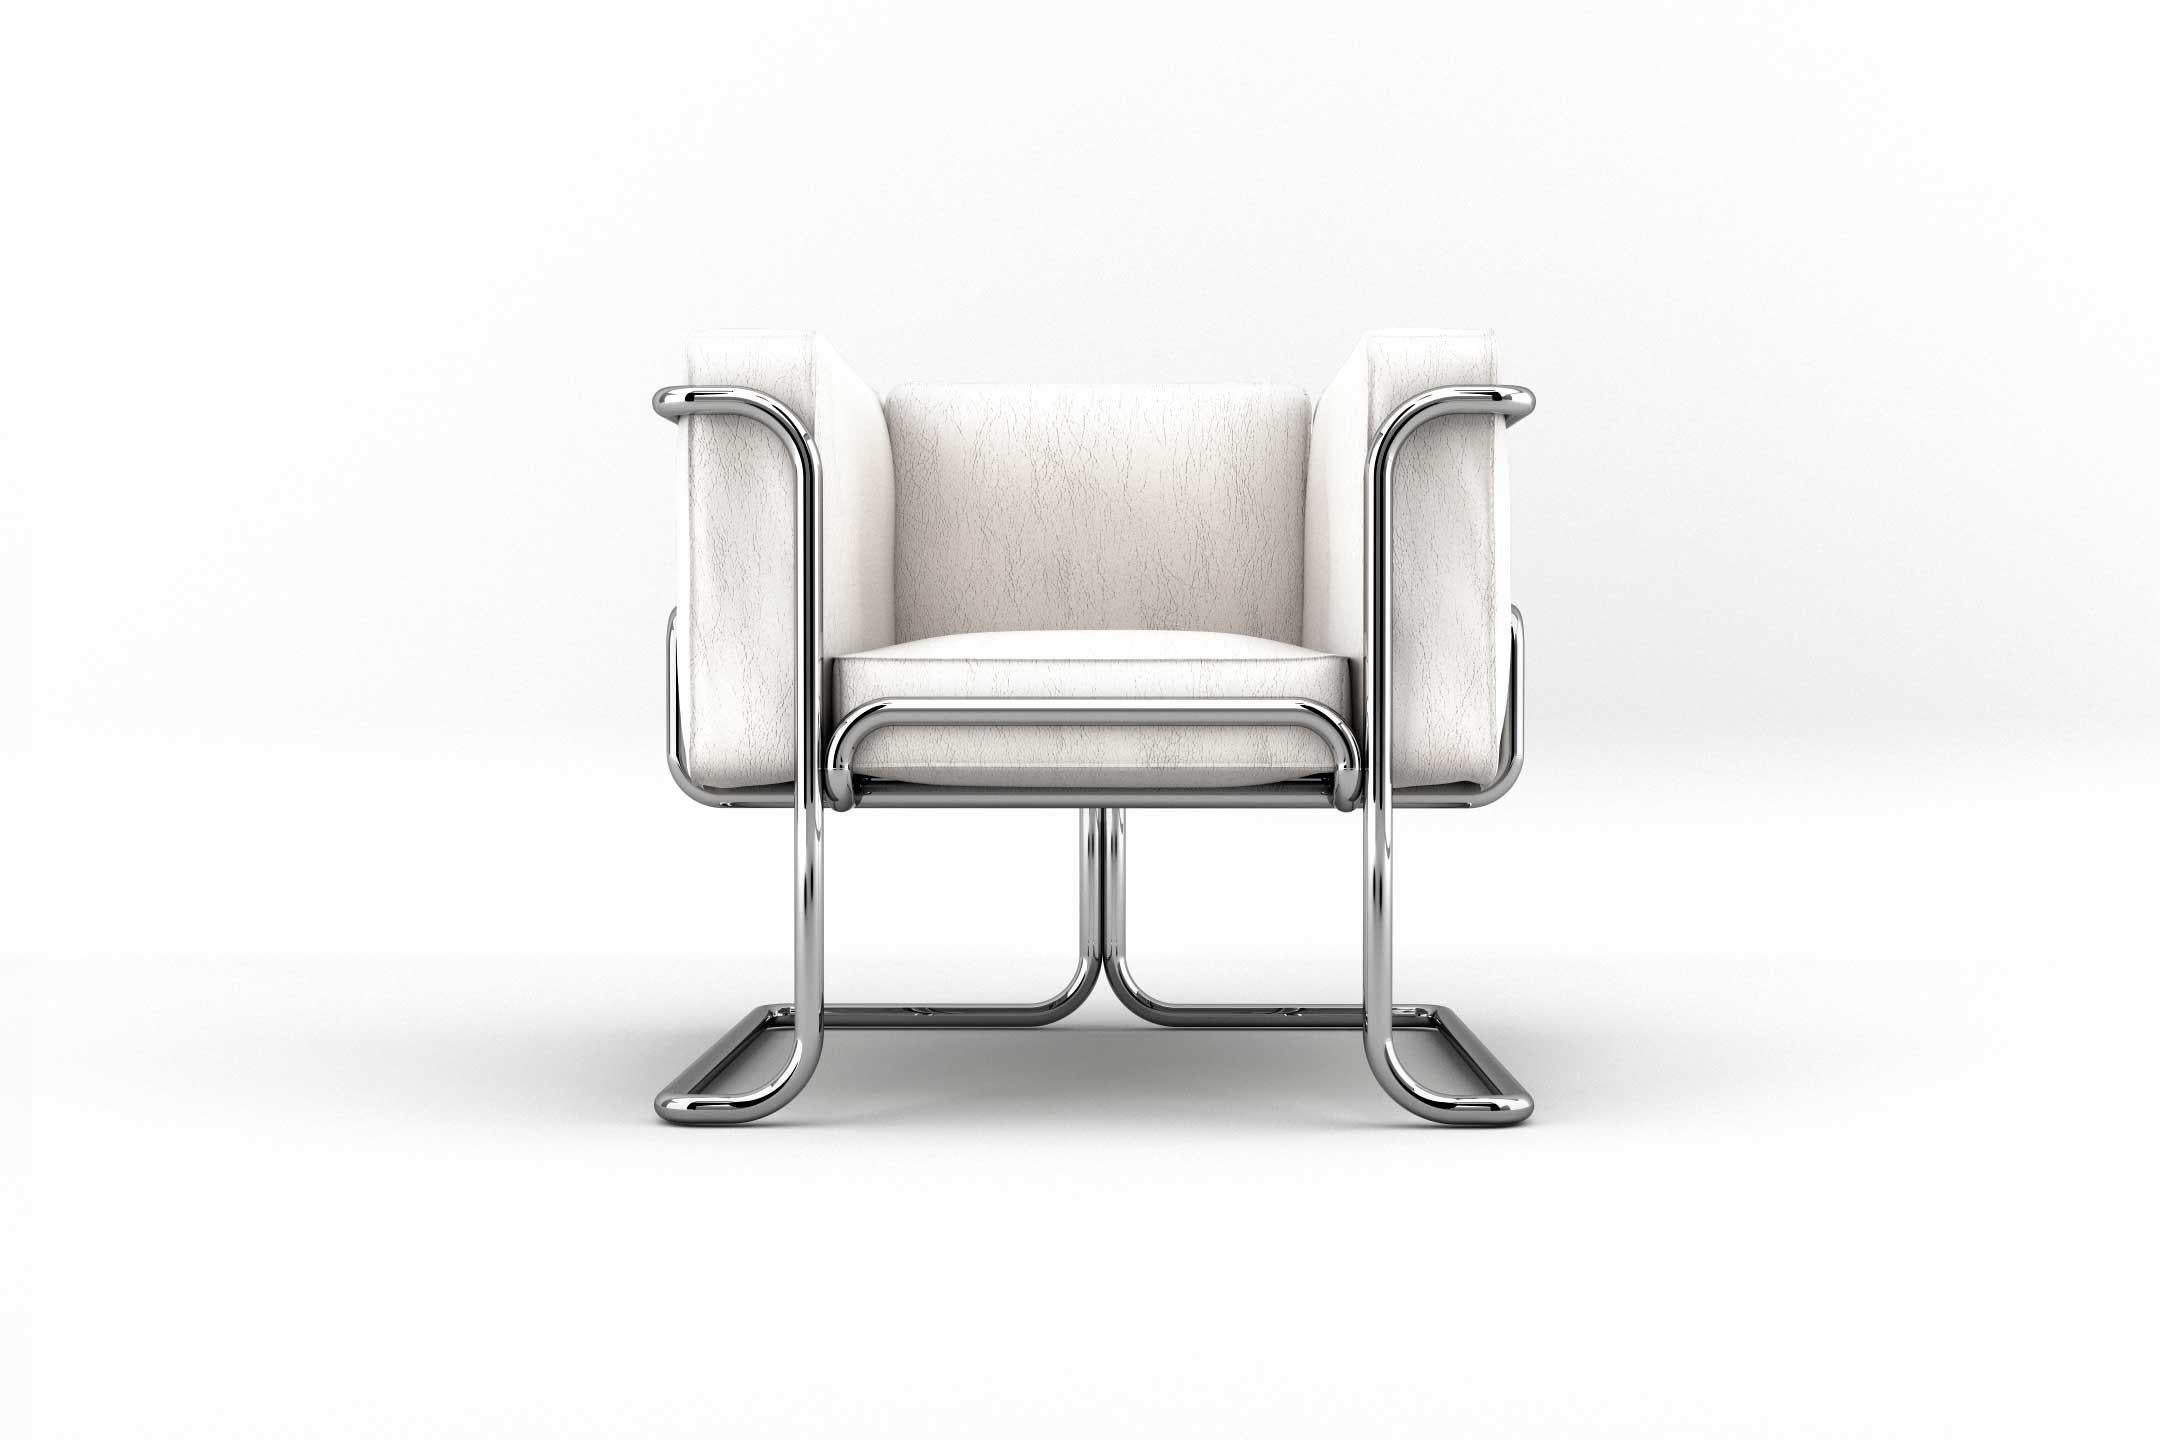 The Lotus collection was created as a reference of elegance and etiquette, imbuing its design of a magnetic personality with its geometrical beauty. Its structure is shaped from curved metal tubes with an upholstered leather seat and back which can